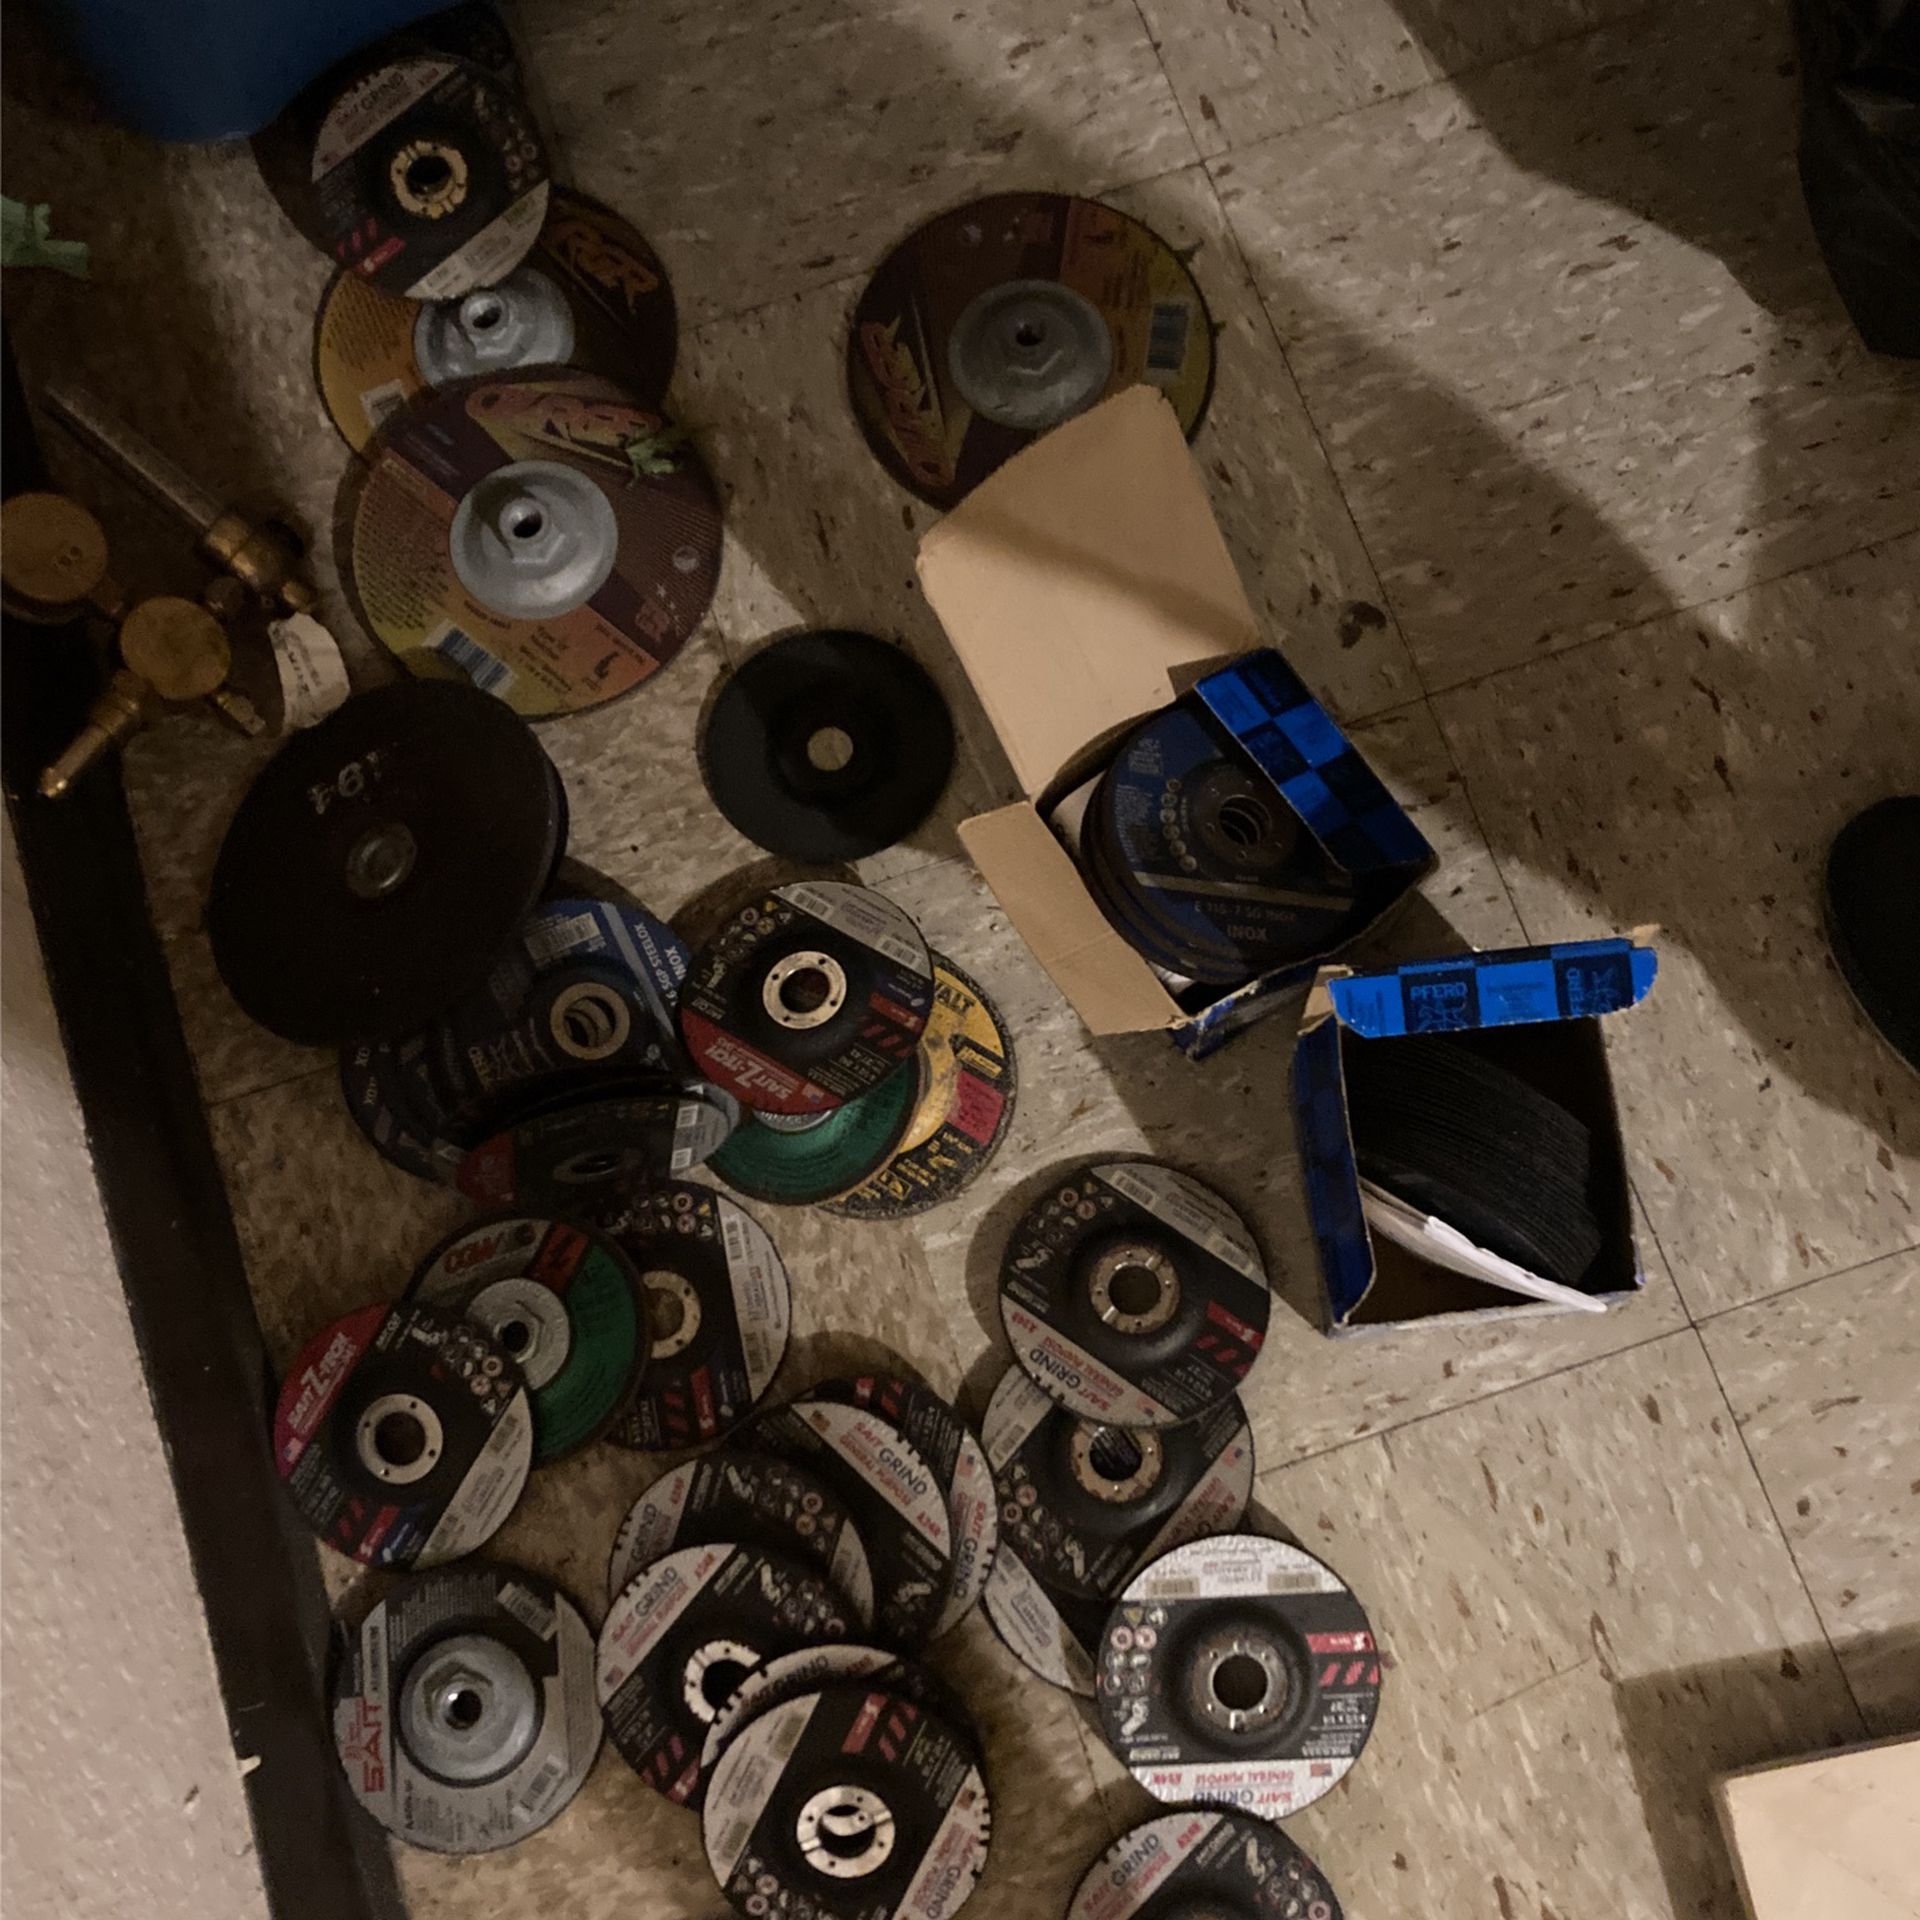 Tons Of Unused Grinding And Cutting Wheels! Crazy Cheap! 